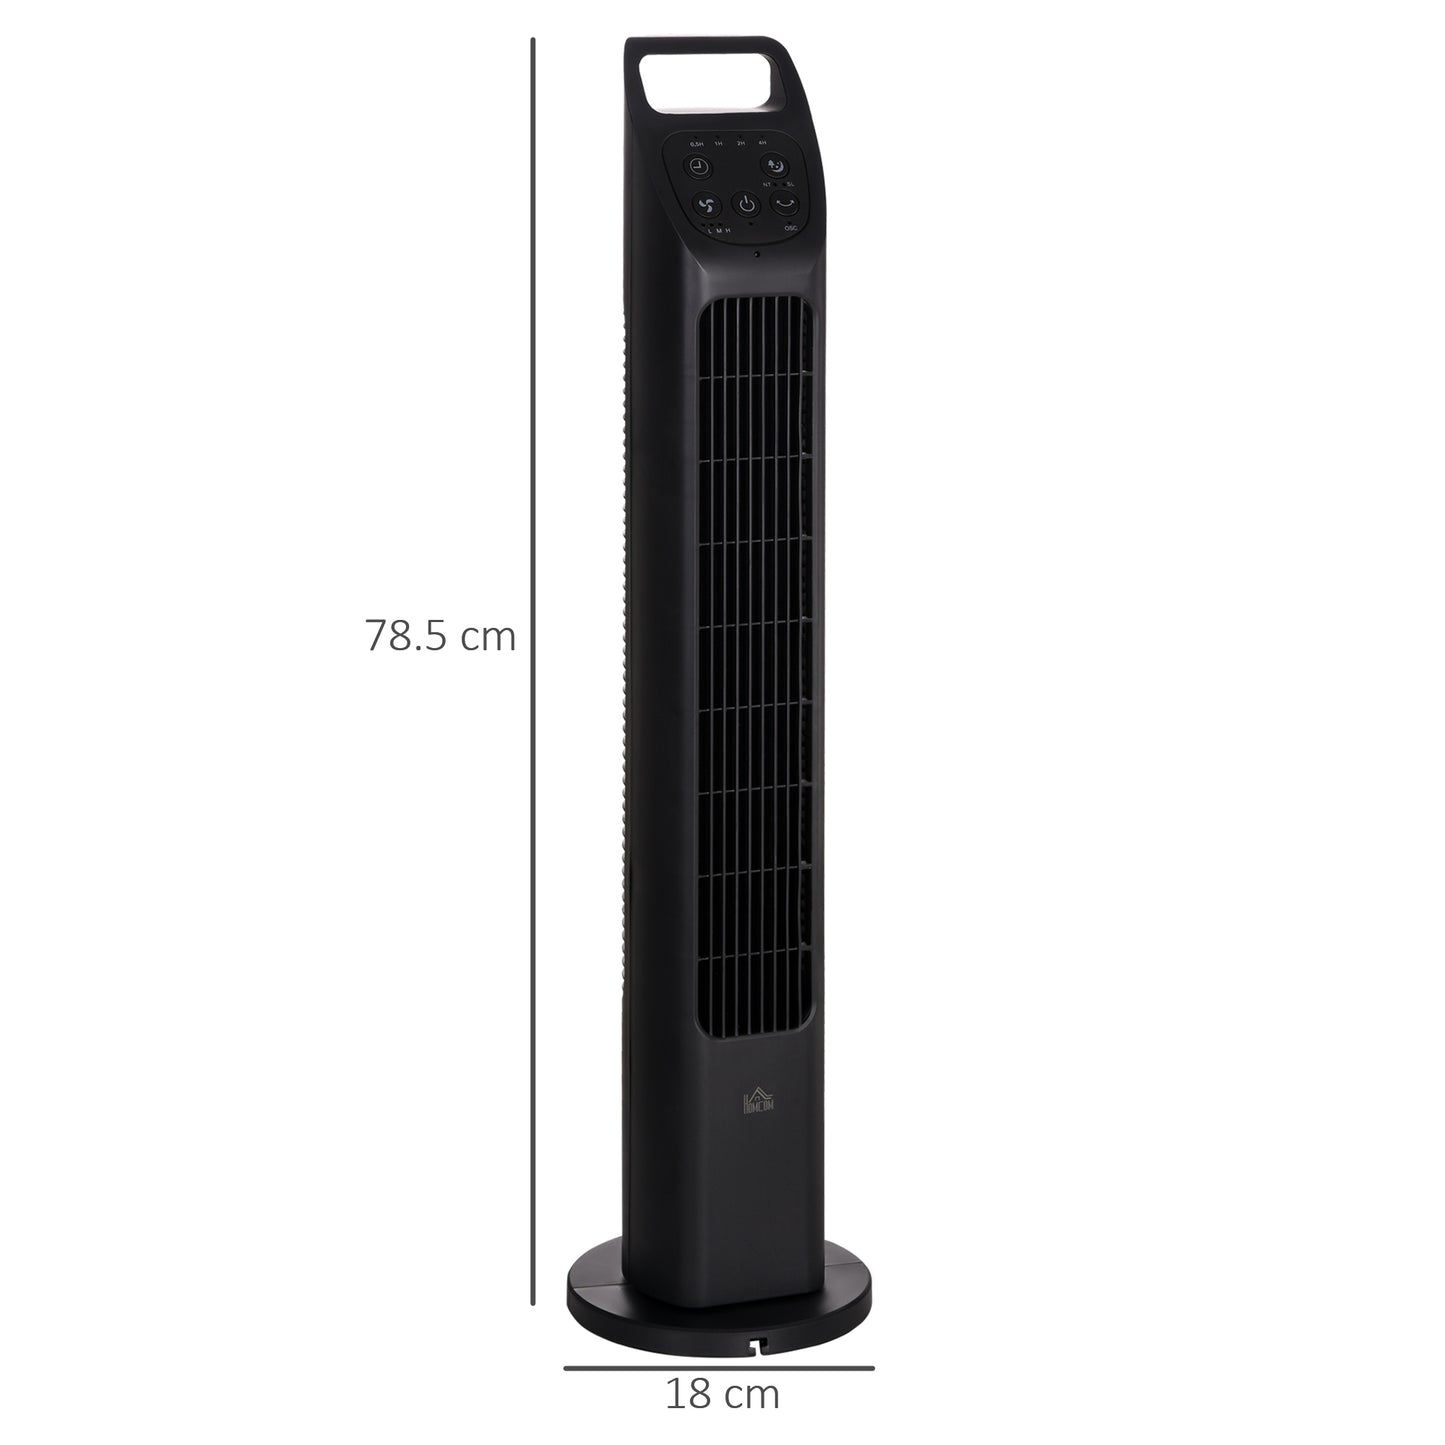 HOMCOM Oscillating Tower Fan with Remote Control, 4H Timer, 3 Speed, Quiet Cooling Fans, Electric Floor Standing Fan for Home Bedroom Office, Black